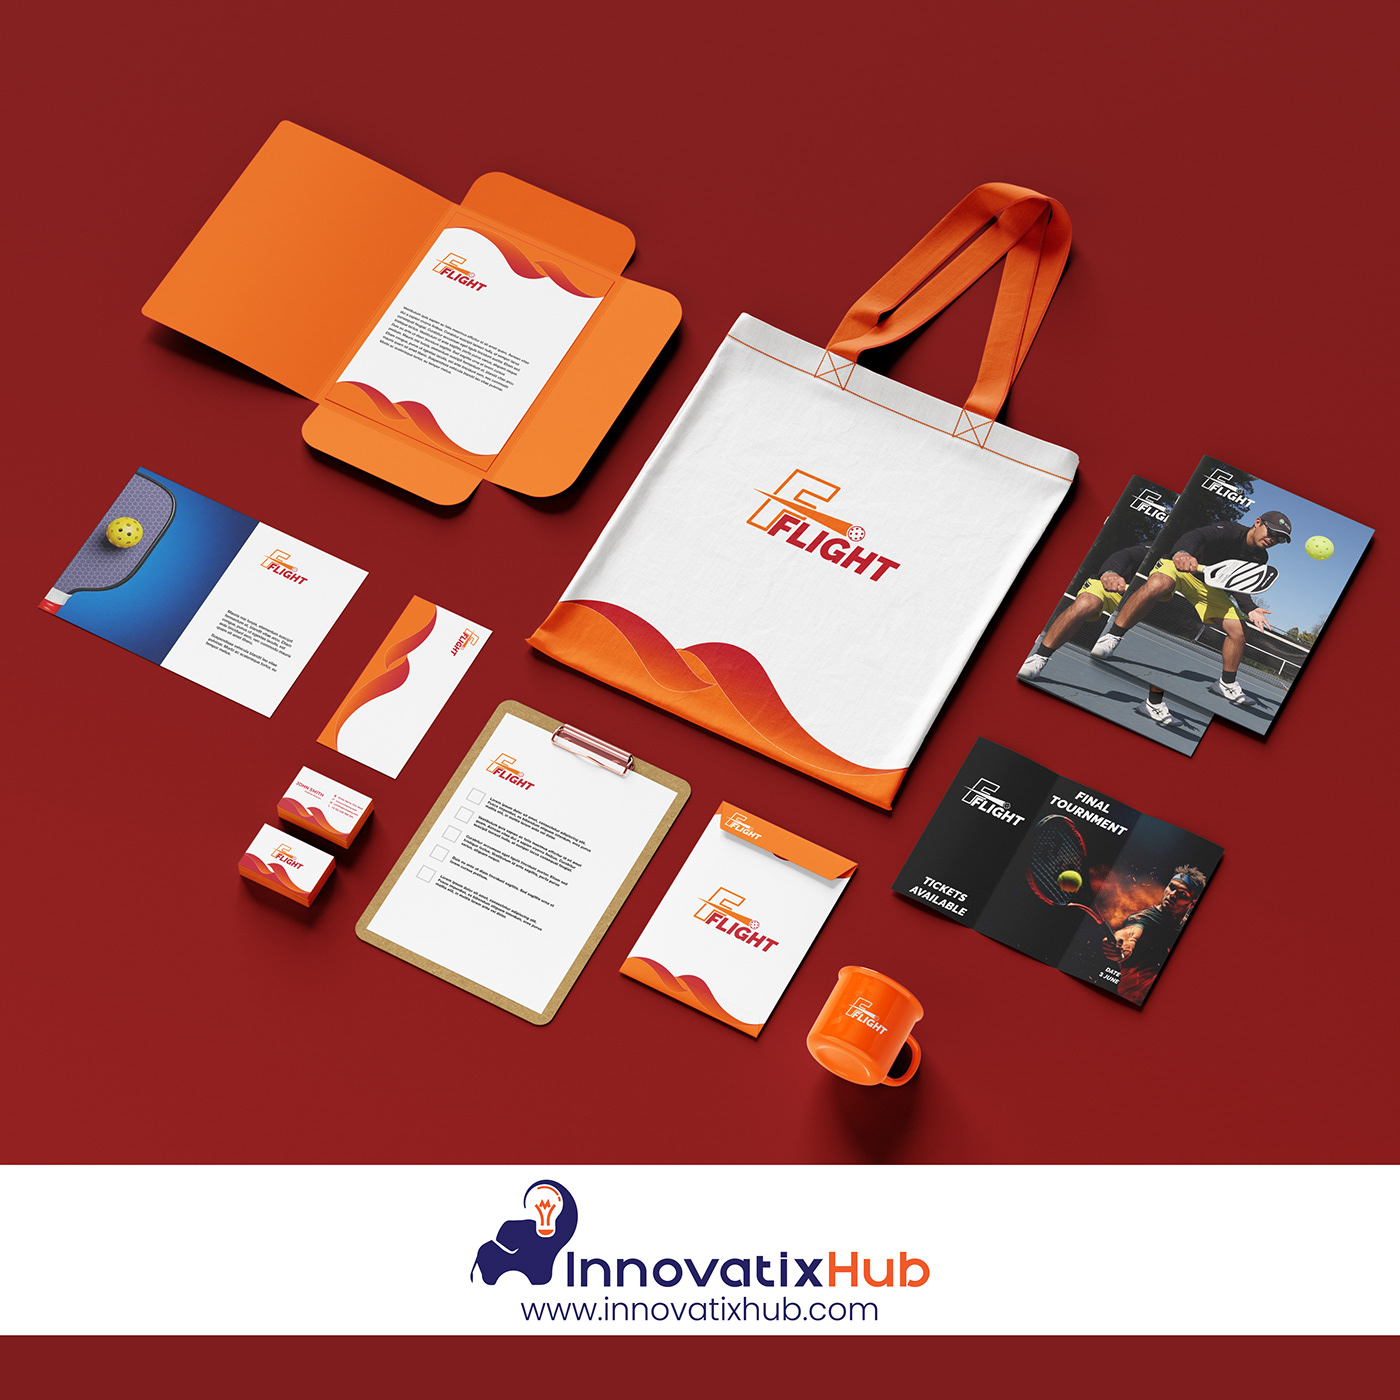 Soar to new heights in the world of sports with InnovatixHub's 'Flight' logo design service!